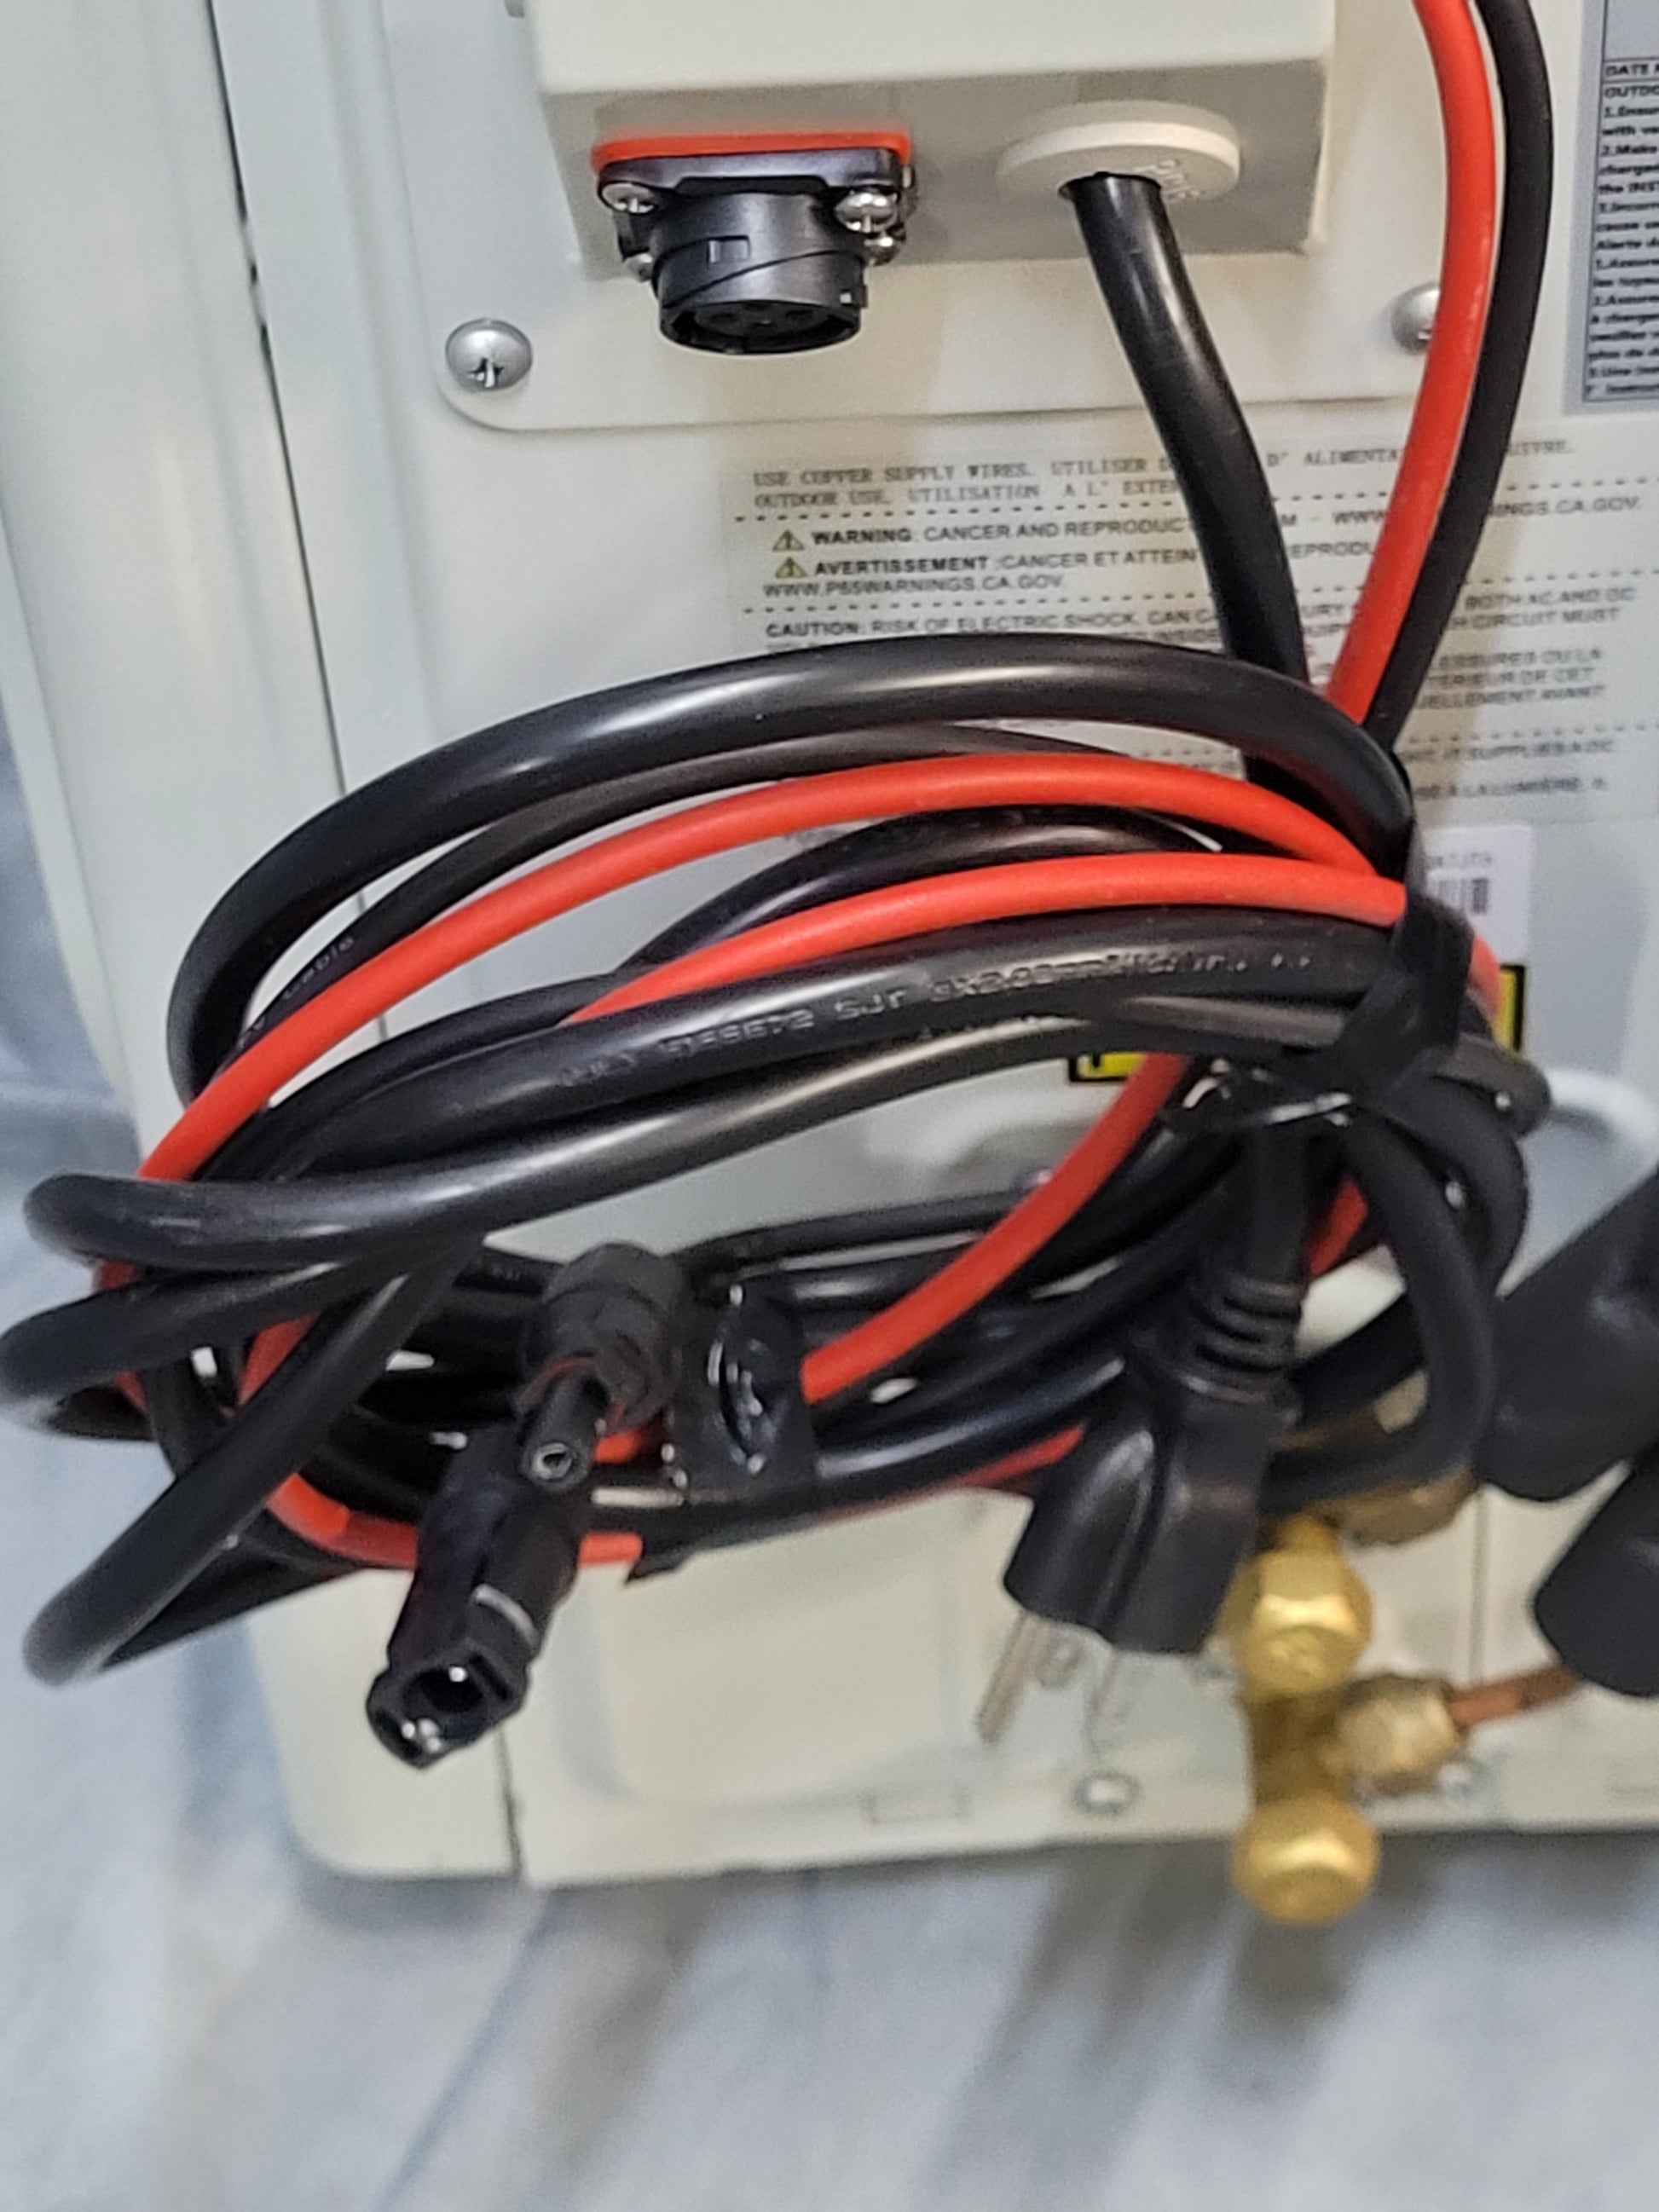 The solar wires and alternating current plug are included and pre-installed on the unit.  